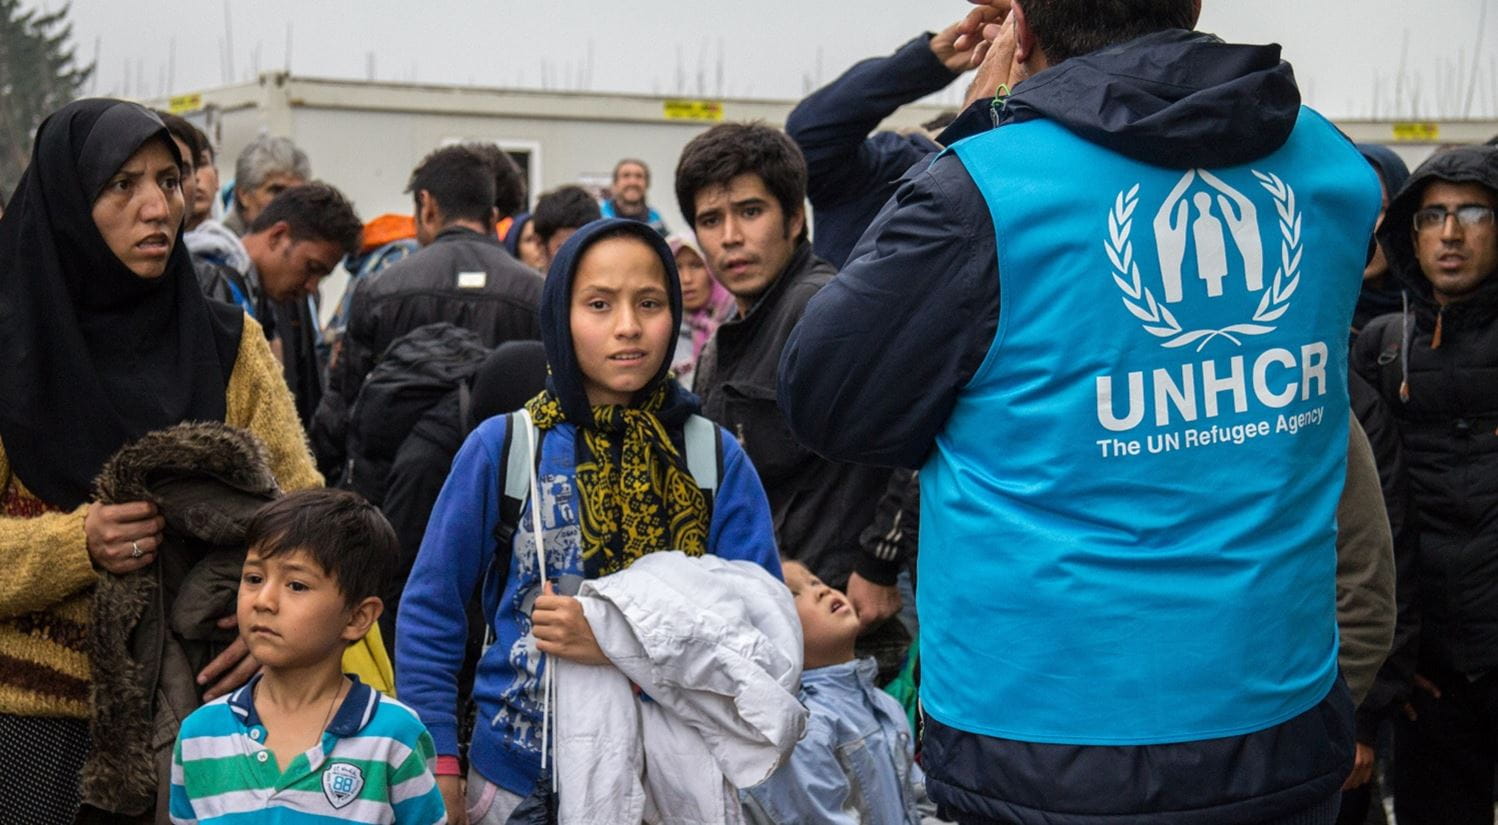 Displacement is a global issue, and millions of people are forced from their homes every year as a result of conflict and persecution. You could help organisations like the UN, fight for their protection.